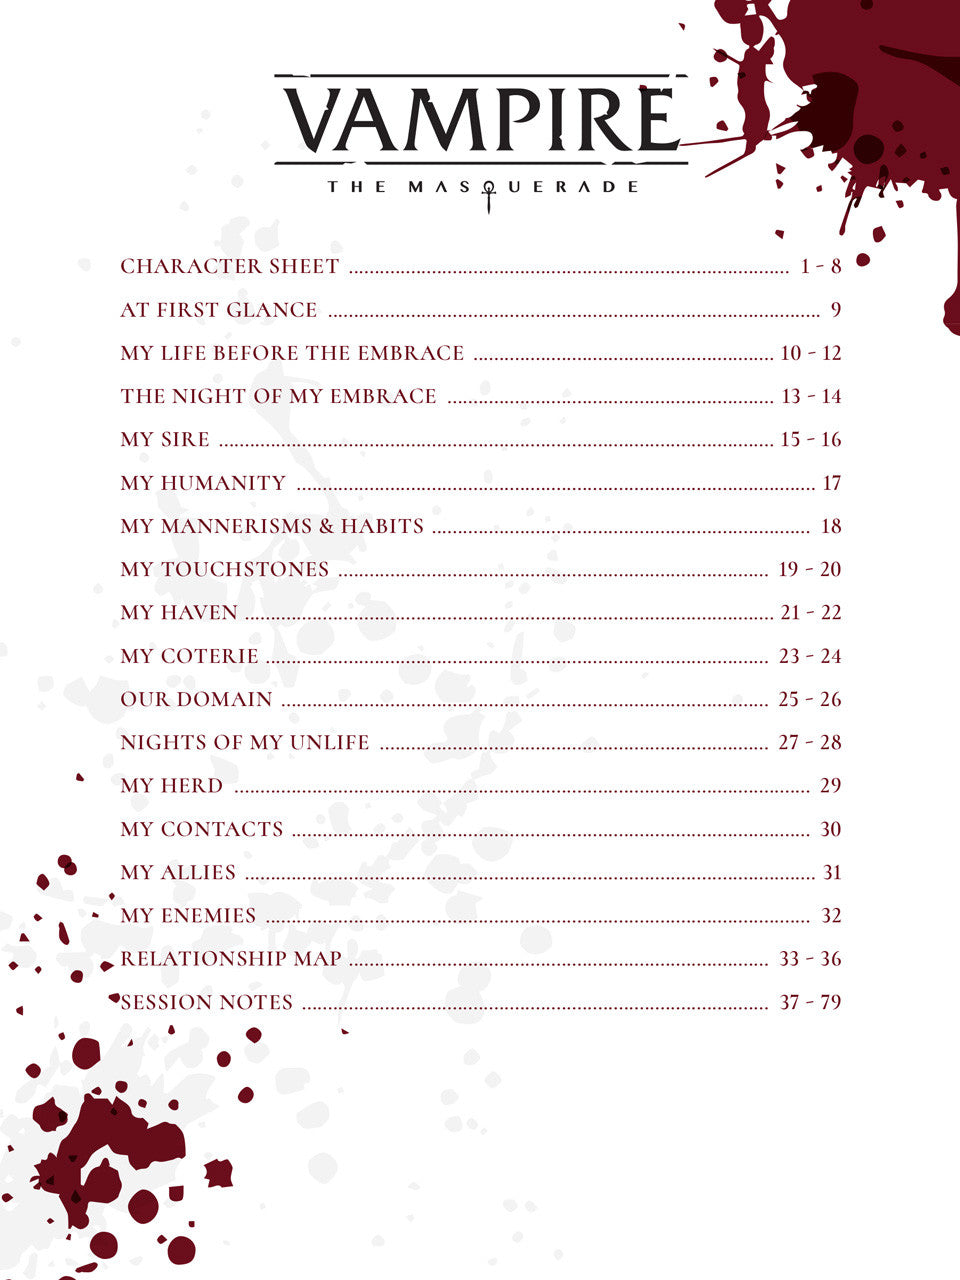 Vampire: The Masquerade 5th Edition Roleplaying Game Expanded Character Sheet Journal